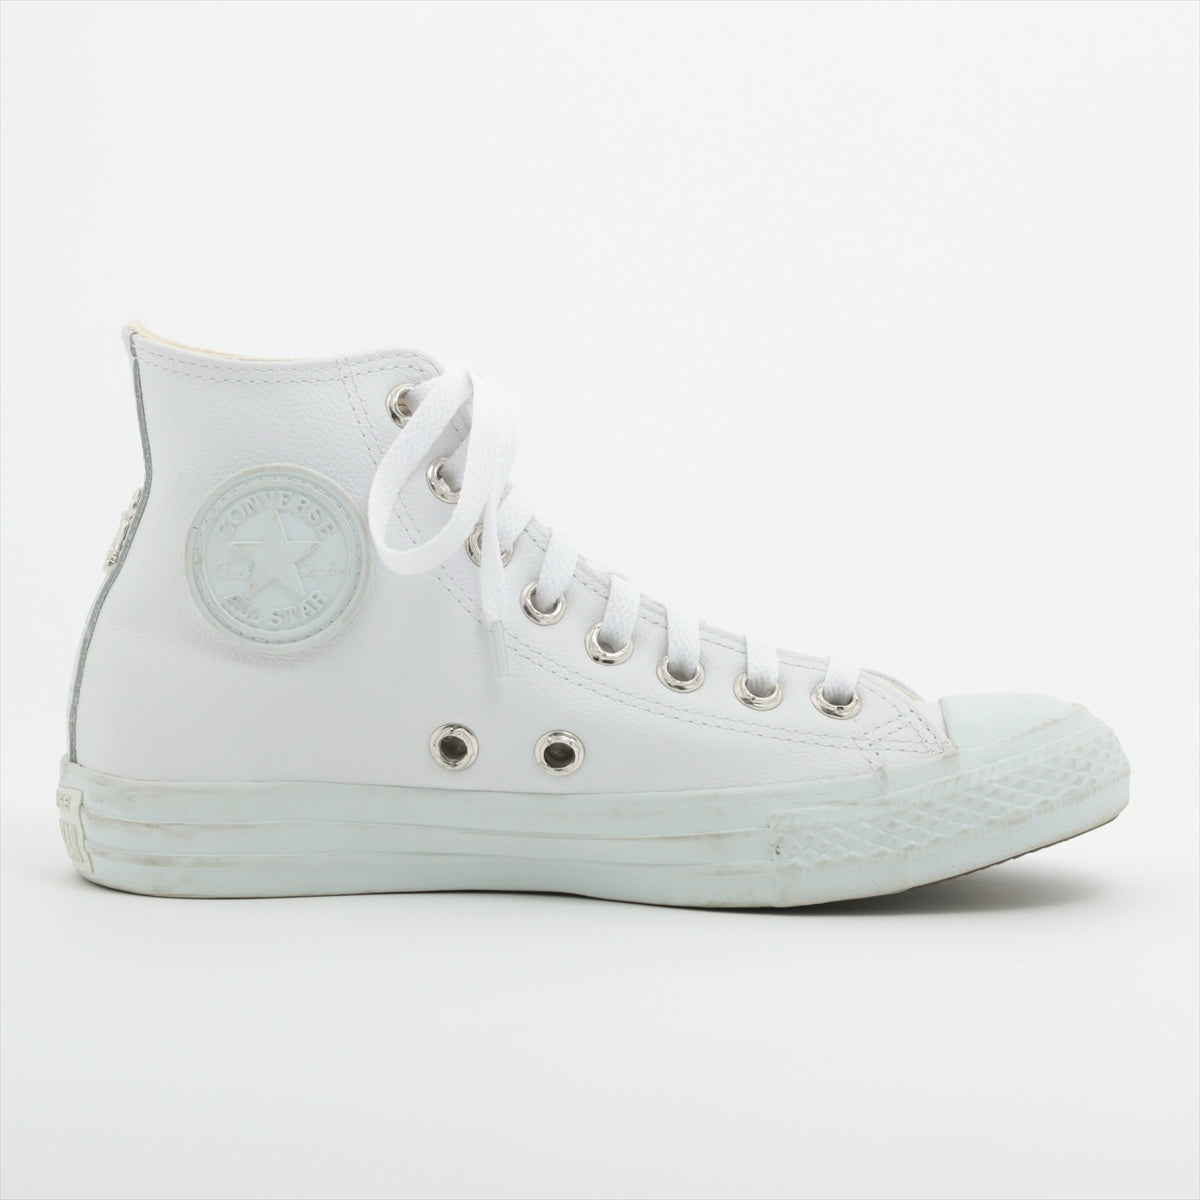 Chrome Hearts x Converse Matty Boy High-top Sneakers Leather size 6 1/2 White